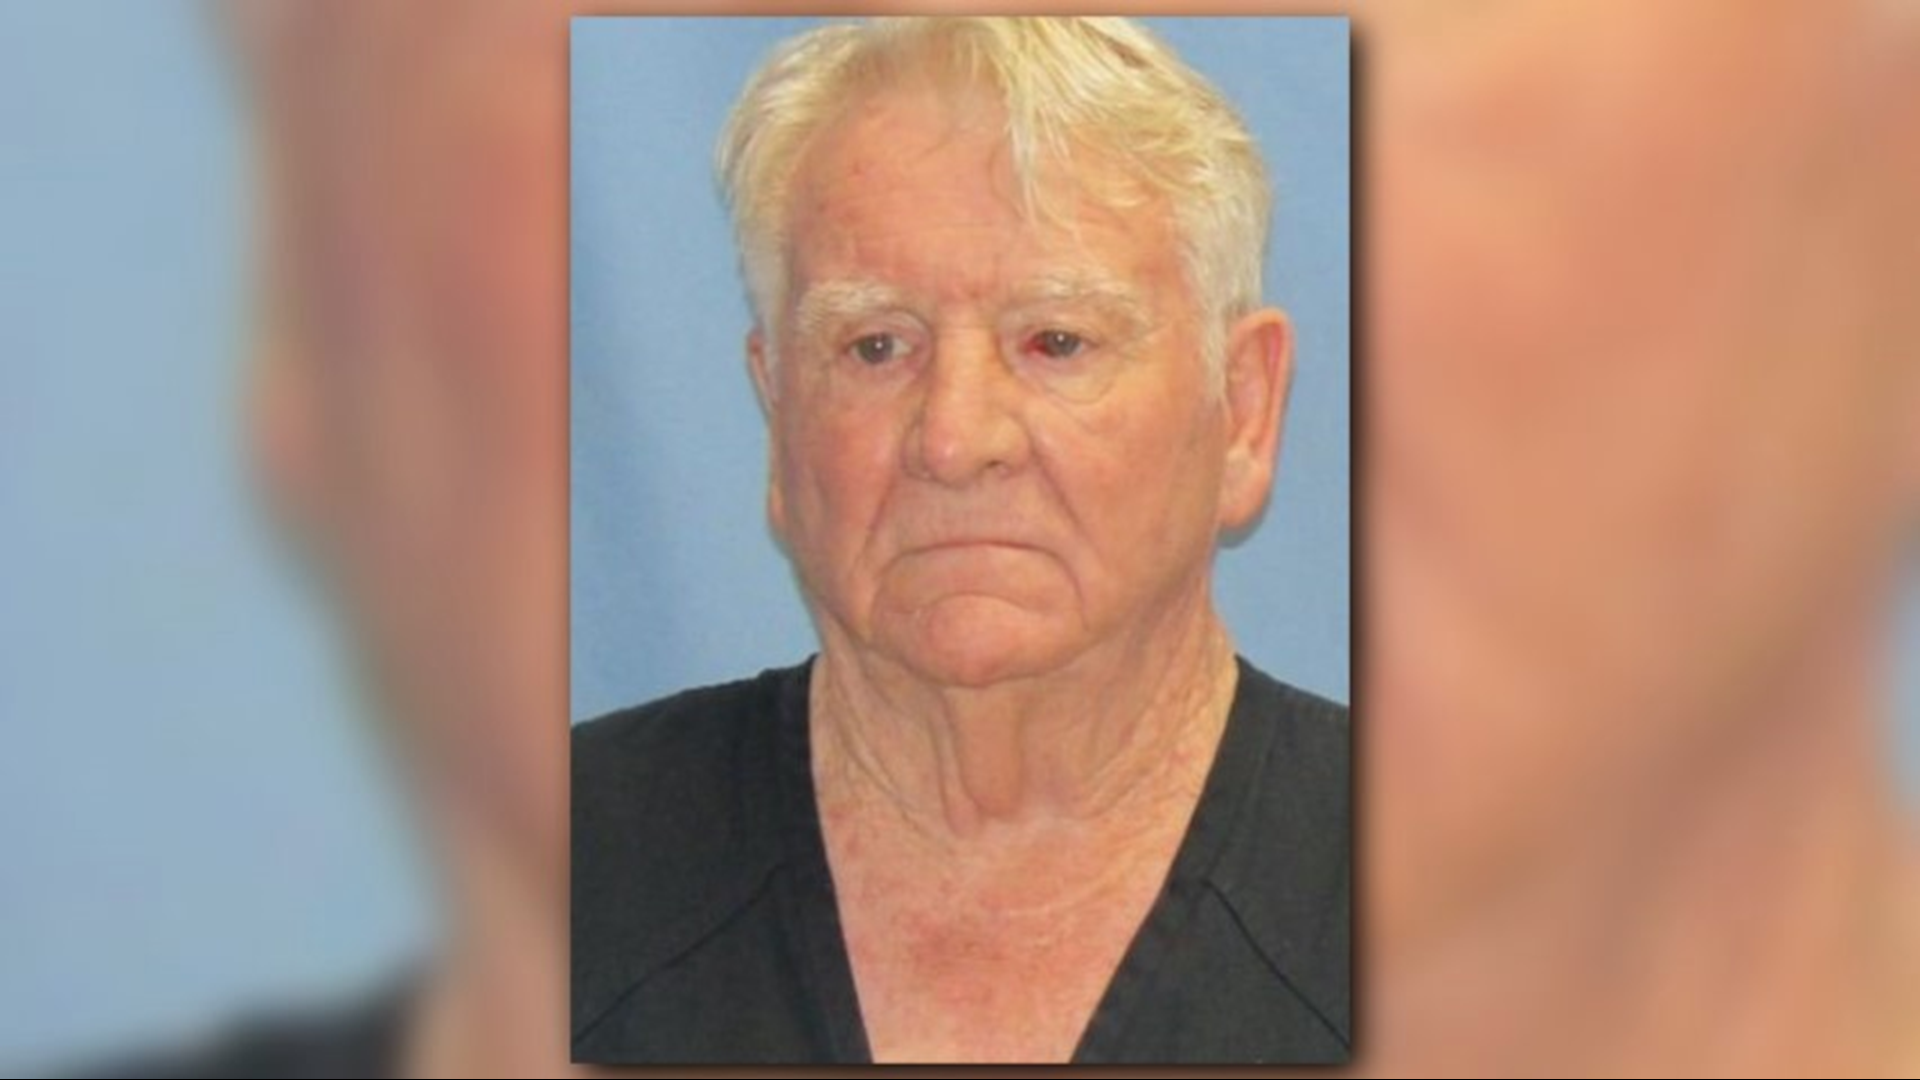 73-year-old Hugh Daniels is facing charges of rape, human trafficking and sexual indecency with a child.